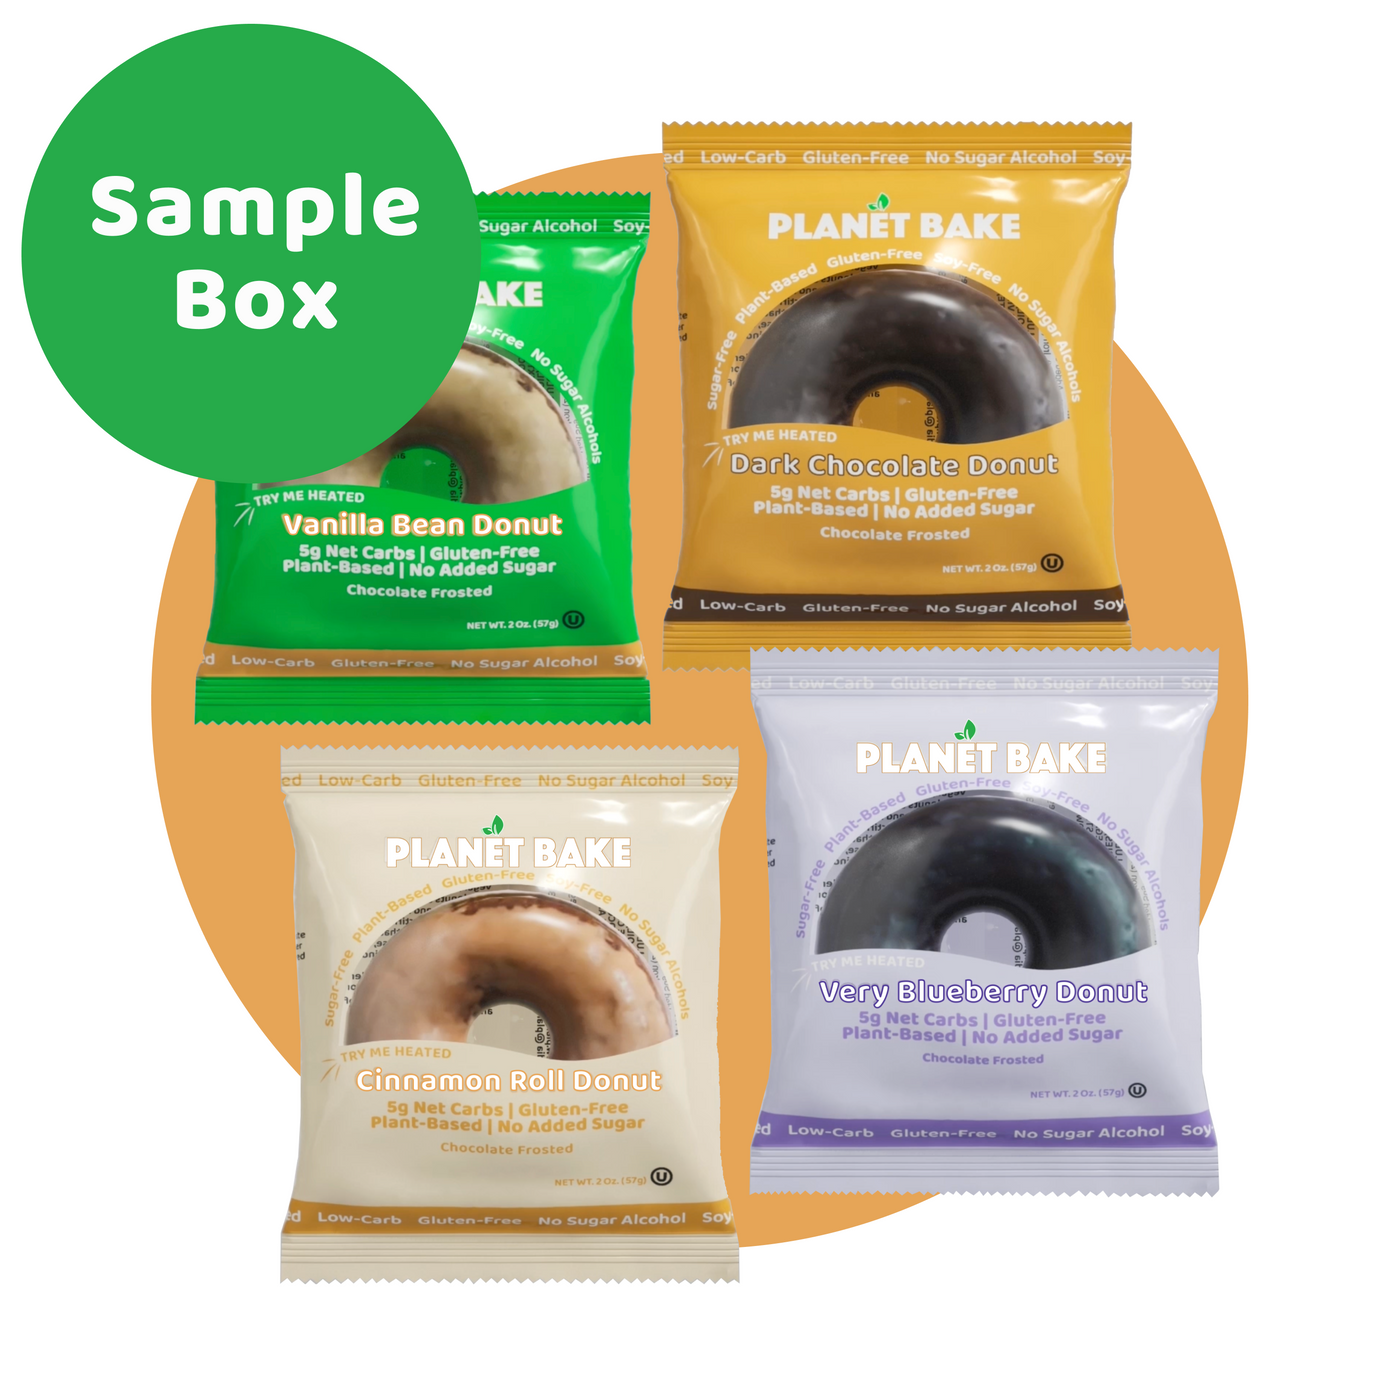 Mixed Flavor Donut Box (8pack)